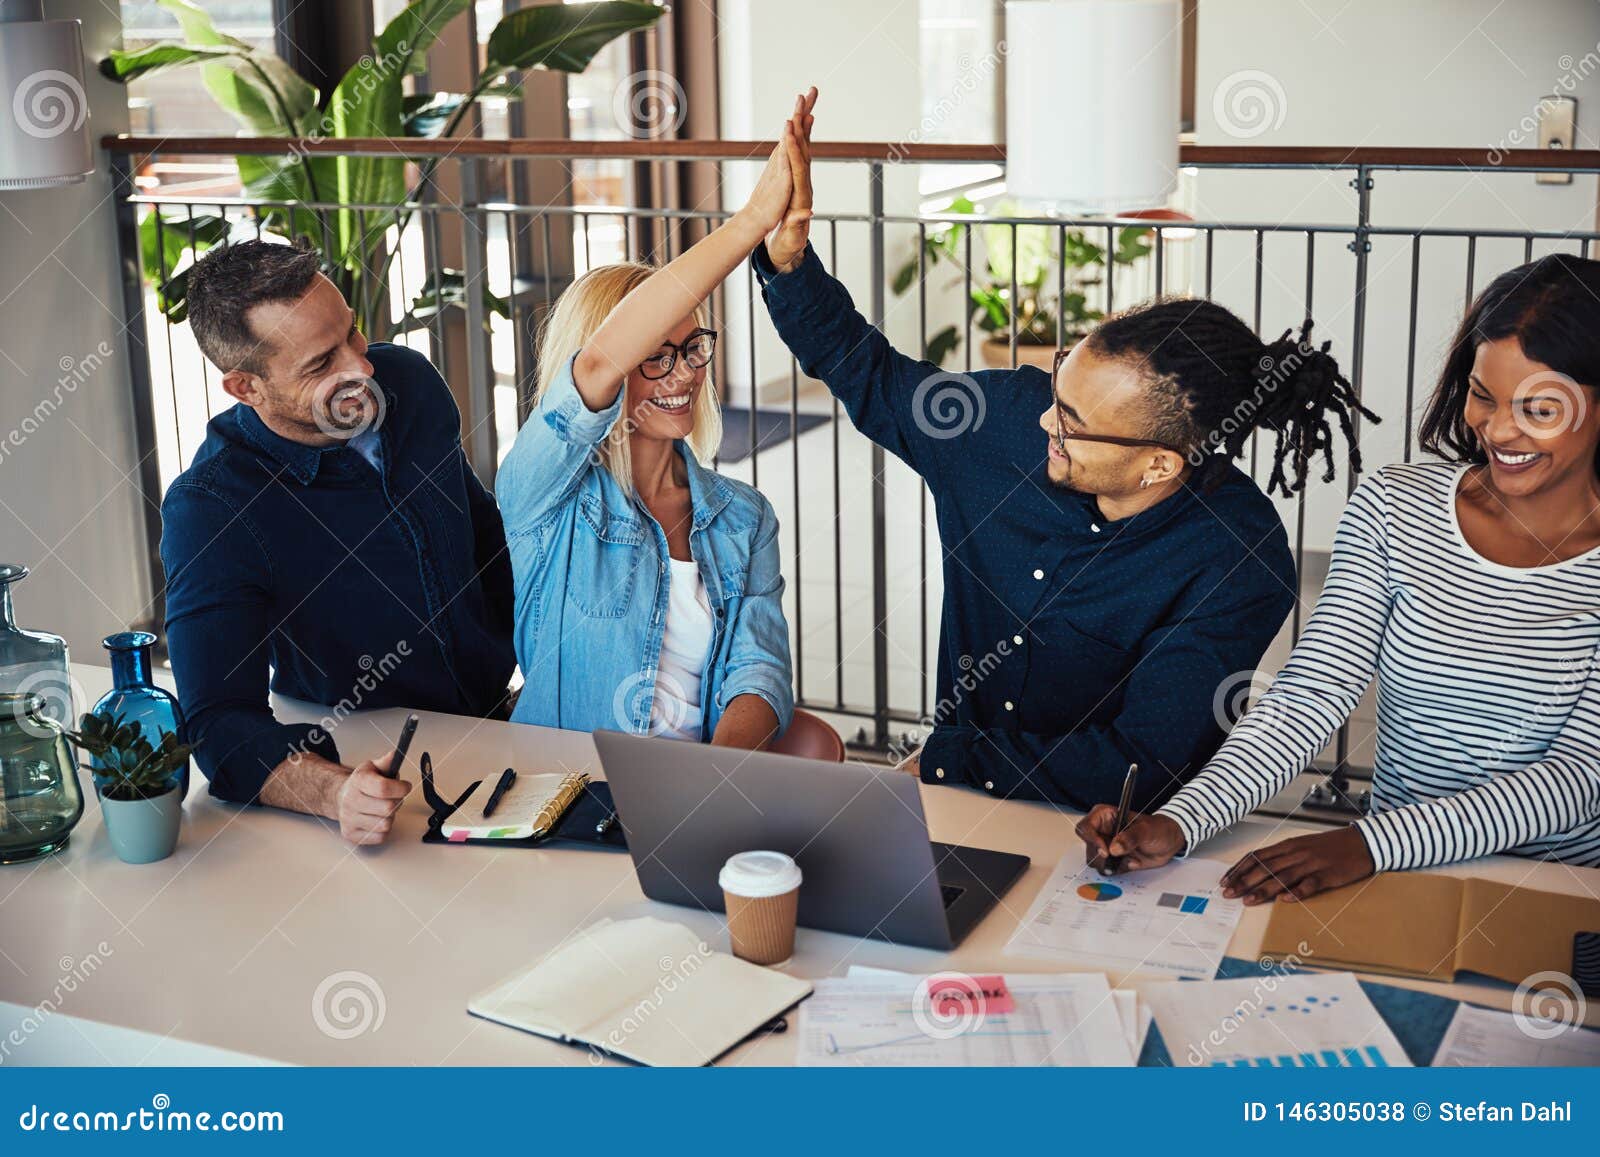 group of laughing coworkers high fiving during an office meeting